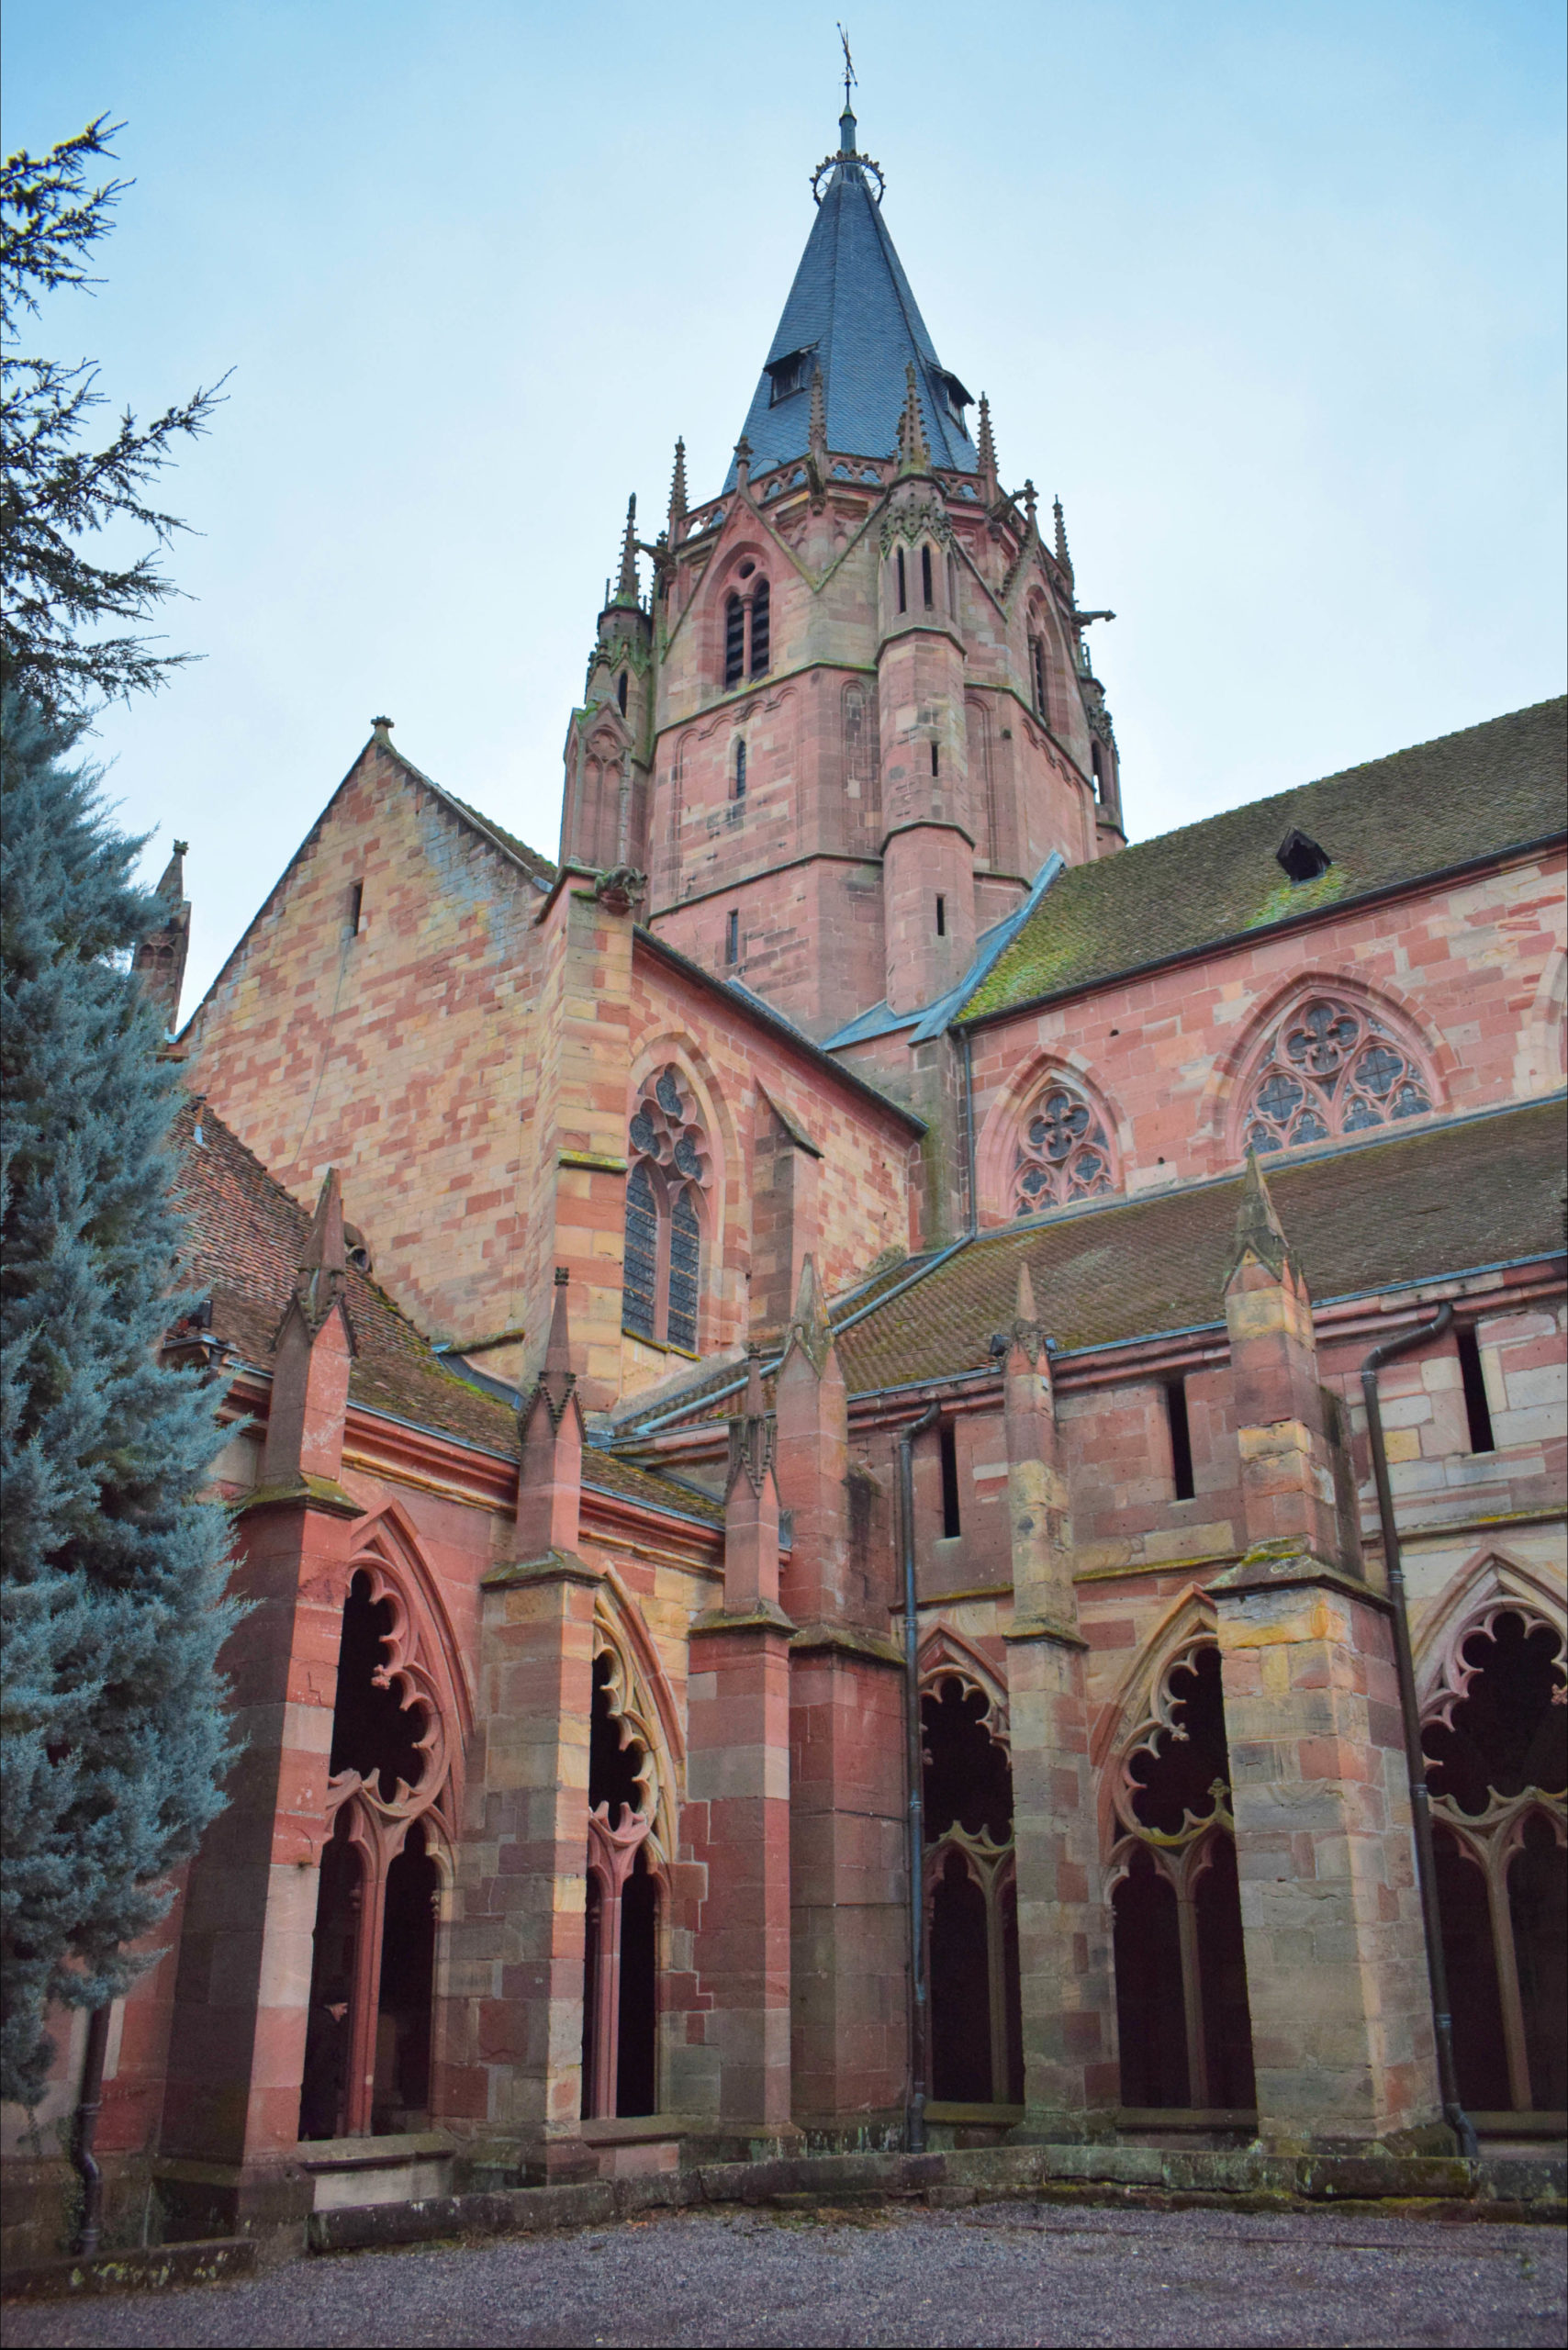 Vosges Sandstone - The abbey church of Wissembourg © French Moments